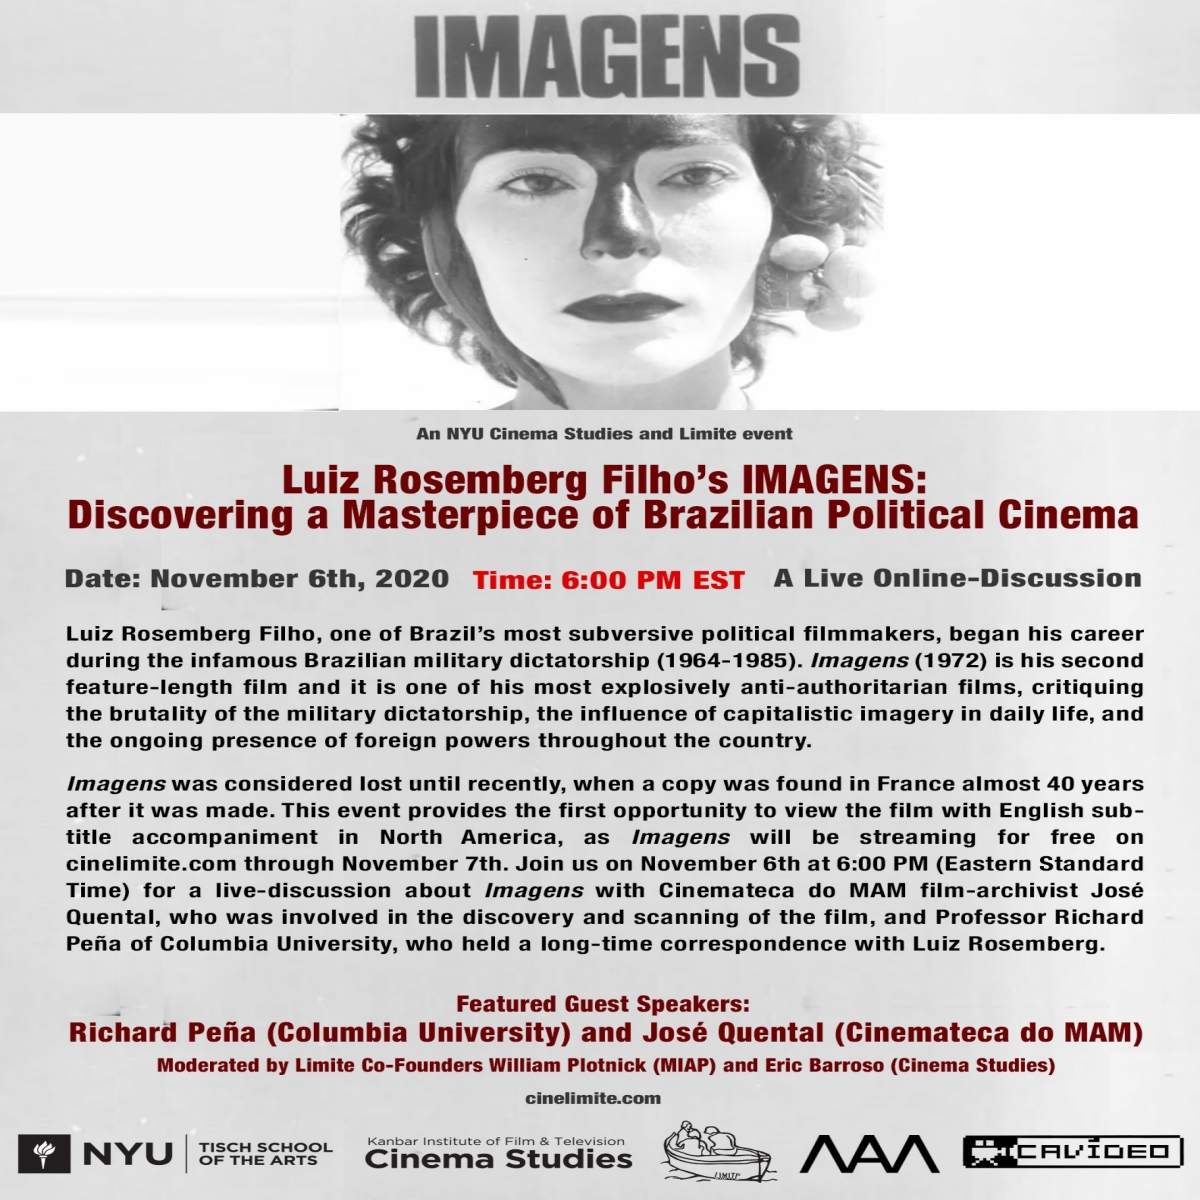 image of poster for IMAGENS, giving information regarding the event, with a film still at the top.